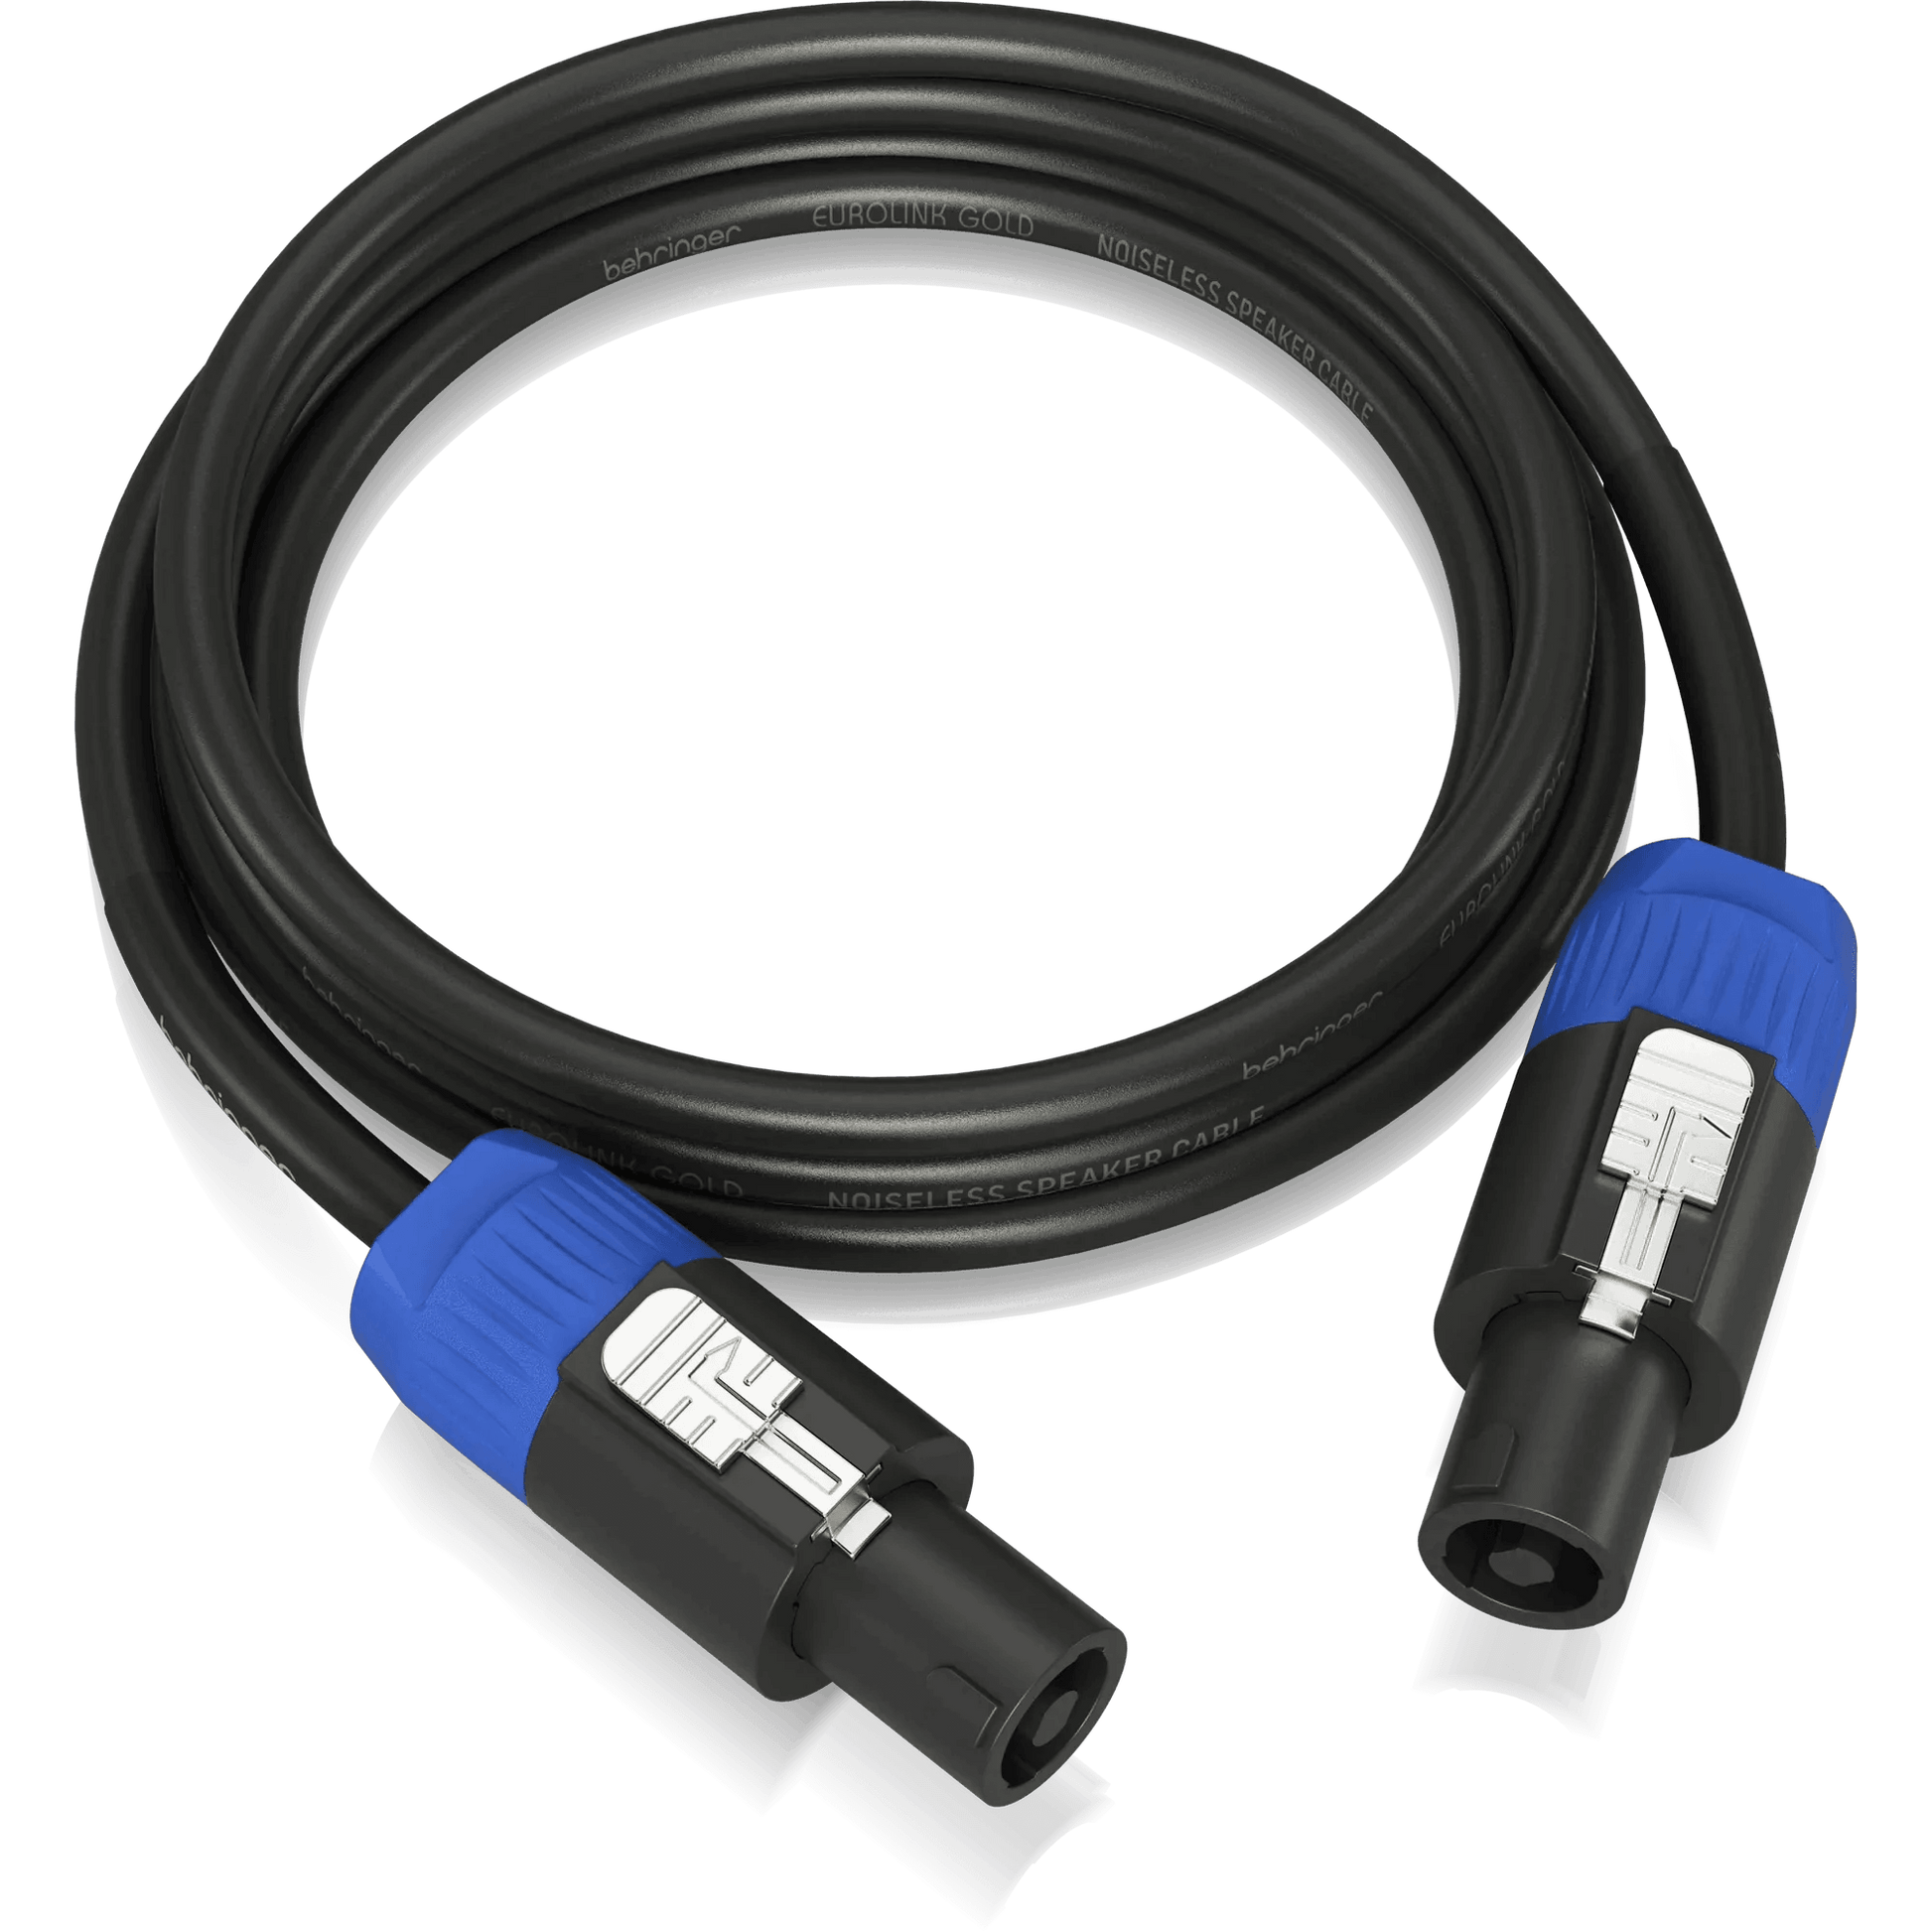 Behringer GLC2-300 Gold Performance 3 m (10 ft) Speaker Cable with Speaker Twist Connectors